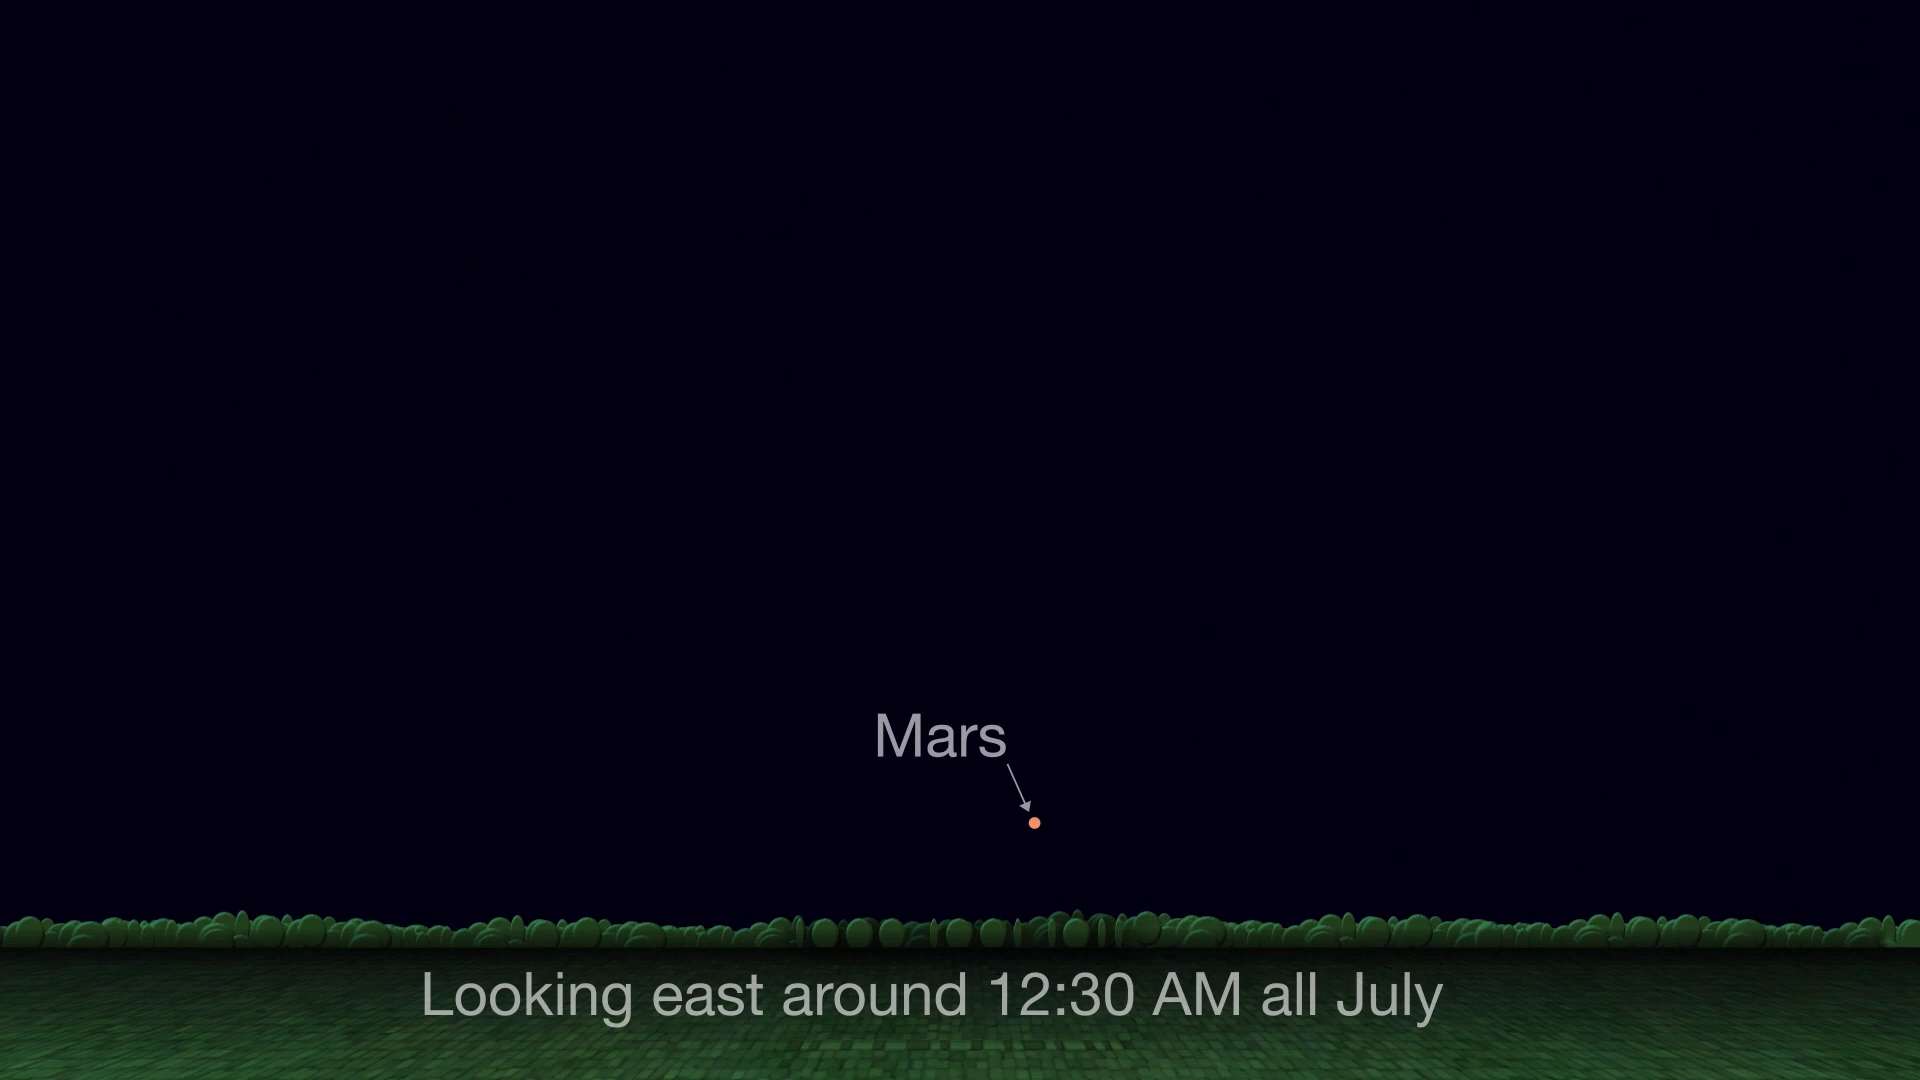 Sky chart showing Mars' position above the horizon around 12:30am in July